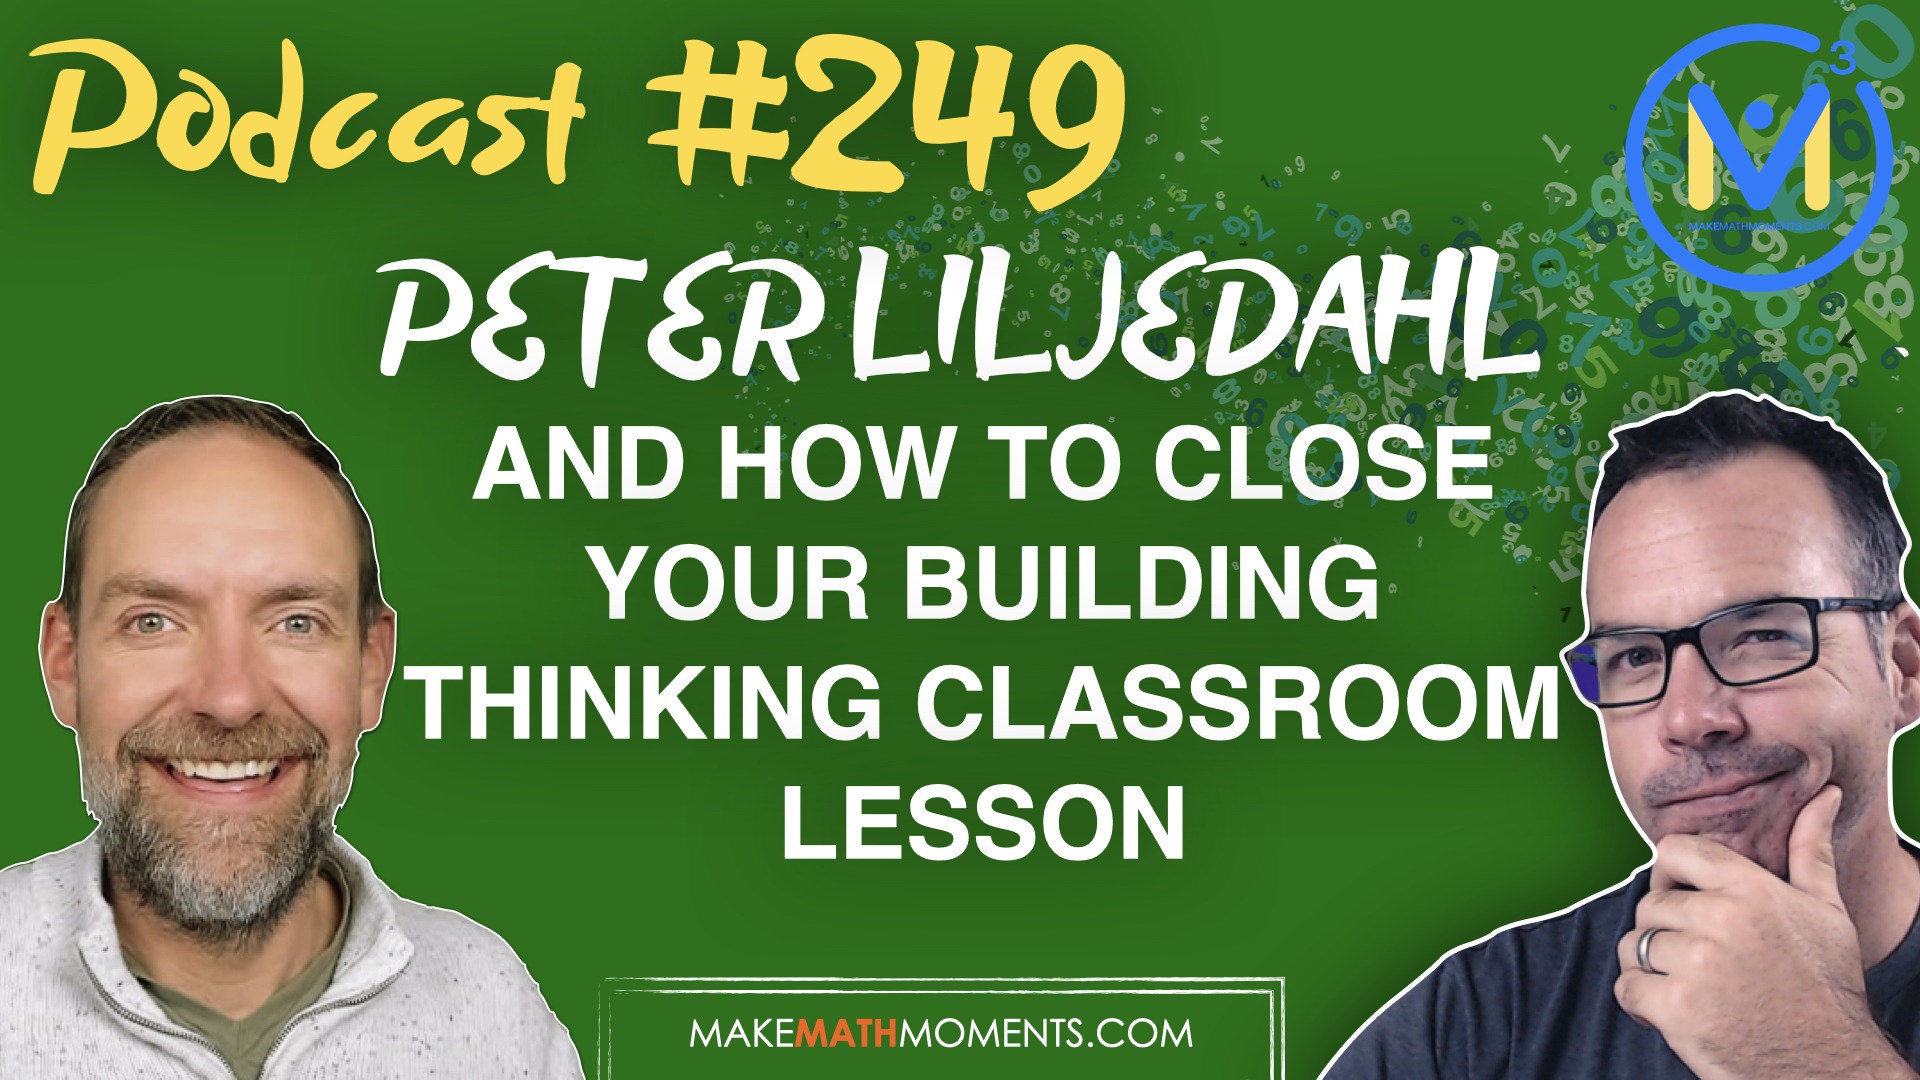 Episode #249: Peter Liljedahl and How To Close Your Building Thinking Classroom Lesson